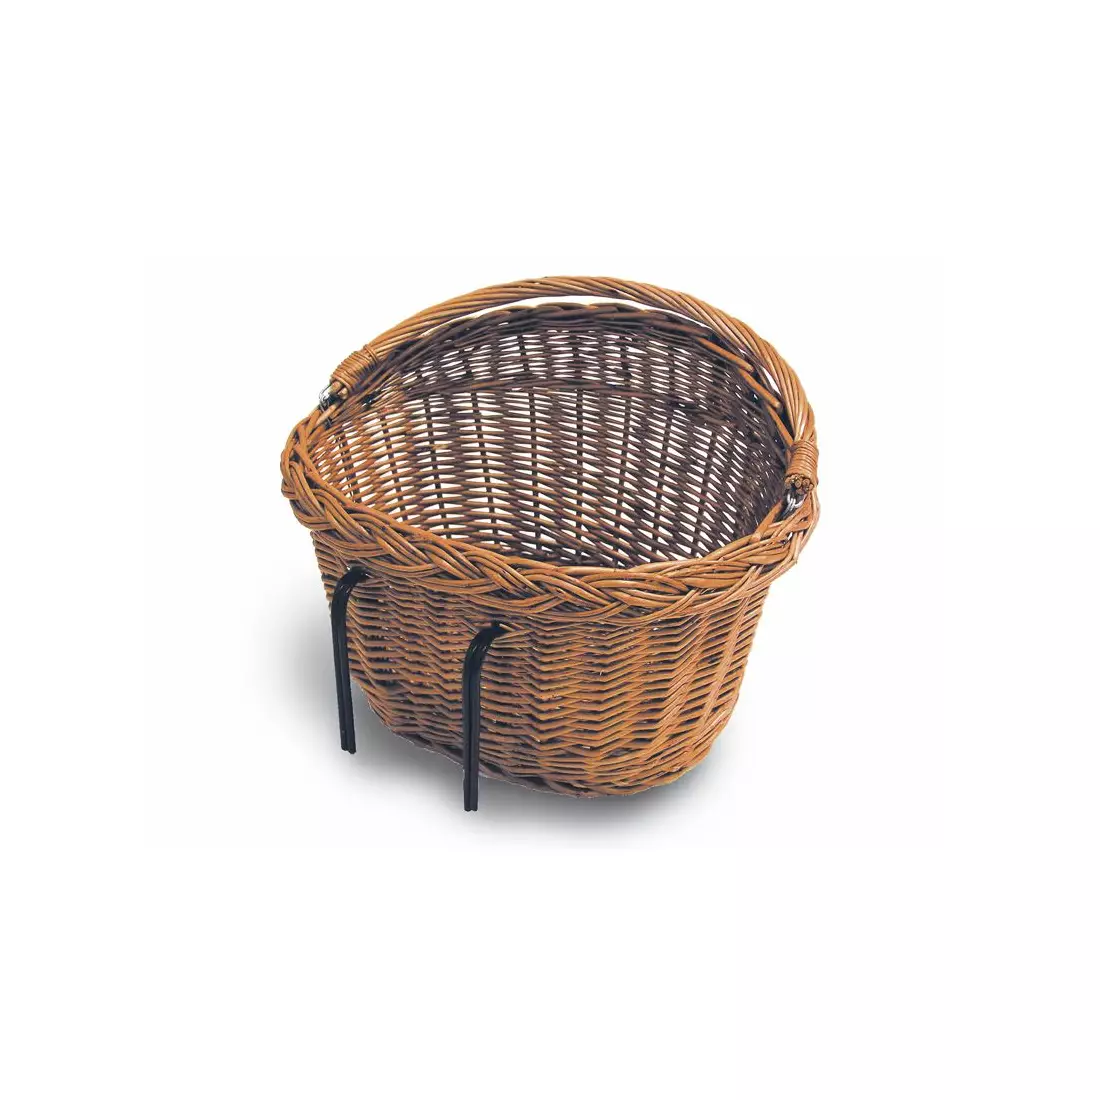 BASIL DETROIT Basket for the steering wheel / luggage rack mounted with hooks, wicker brown BAS-15021